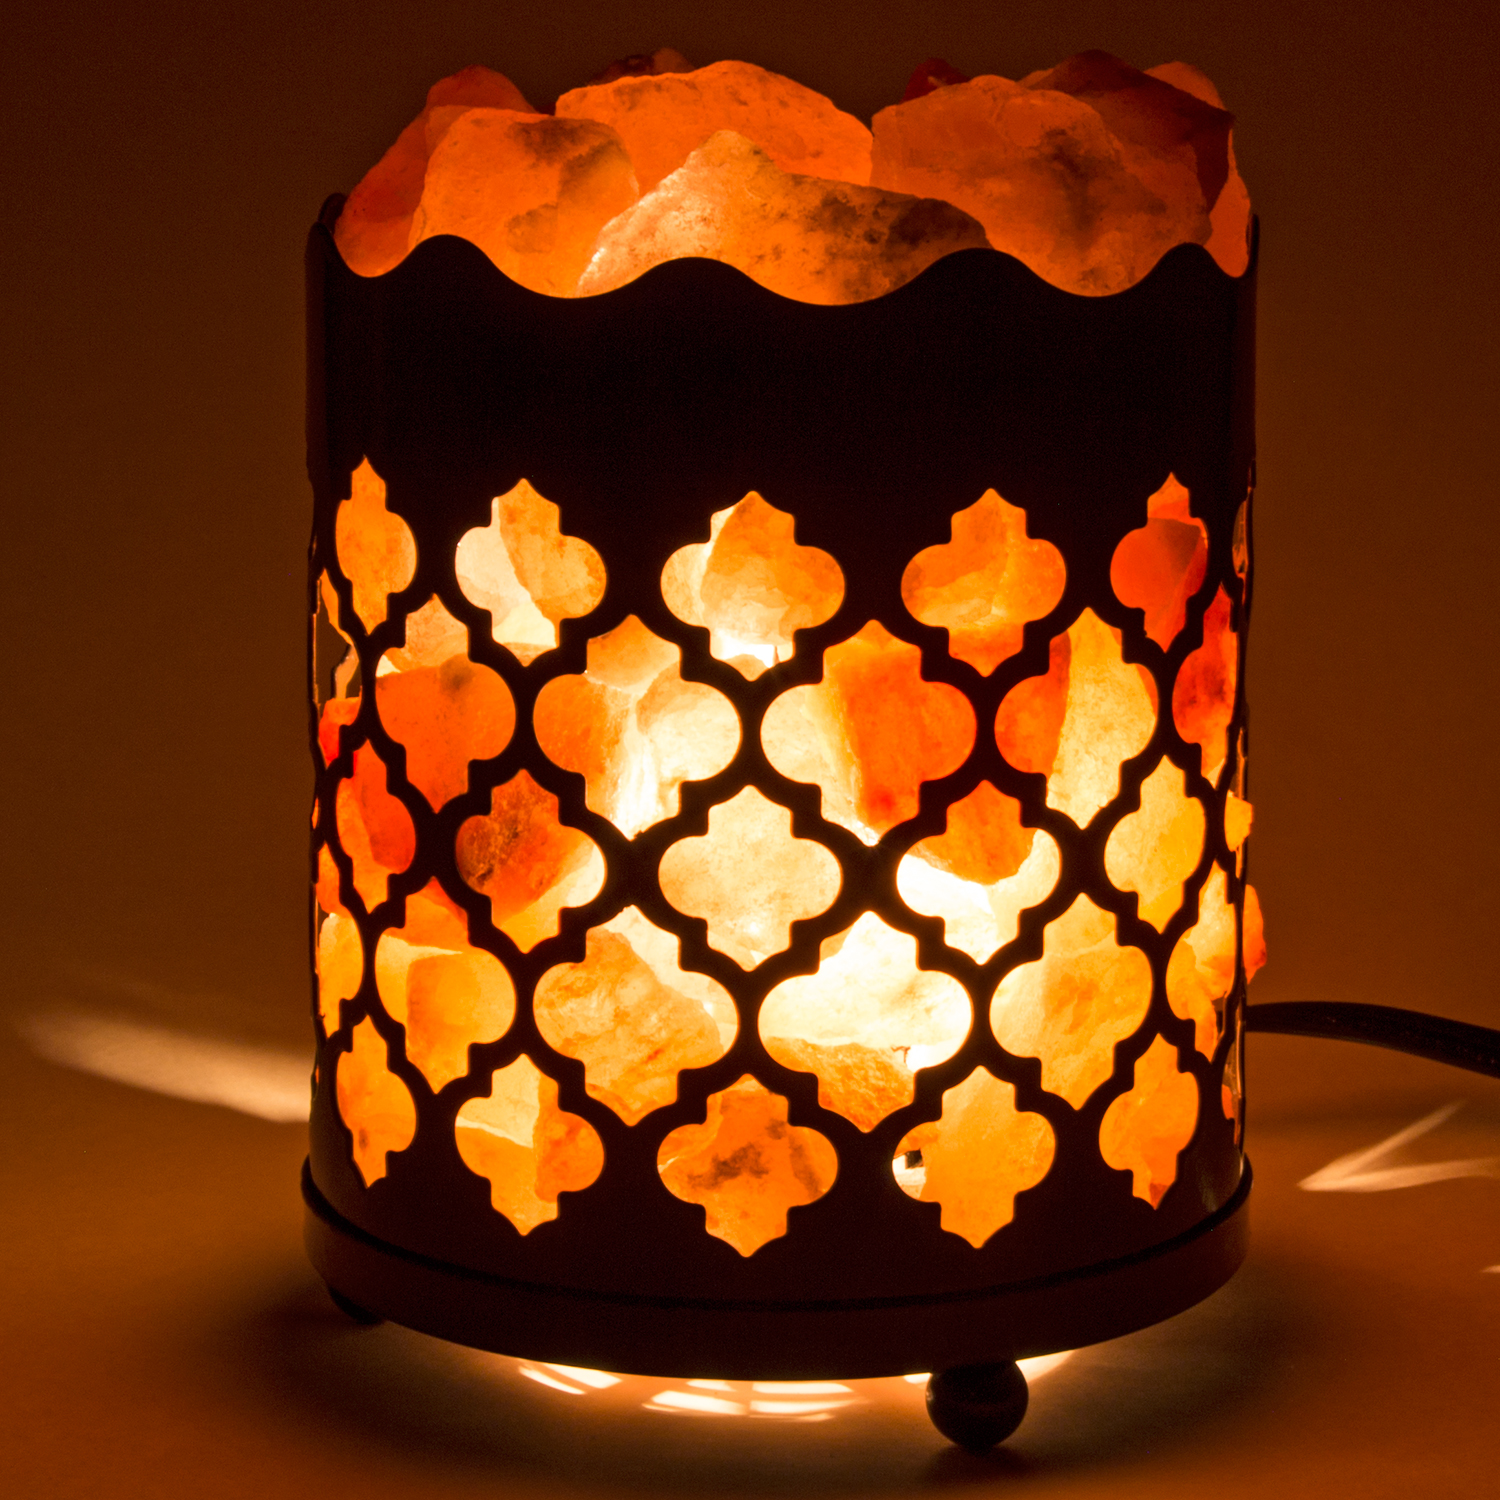 CRYSTAL DECOR Natural Himalayan Salt Lamp with Salt Chunks in Cylinder Design Metal Basket with Dimmable Cord - image 2 of 2